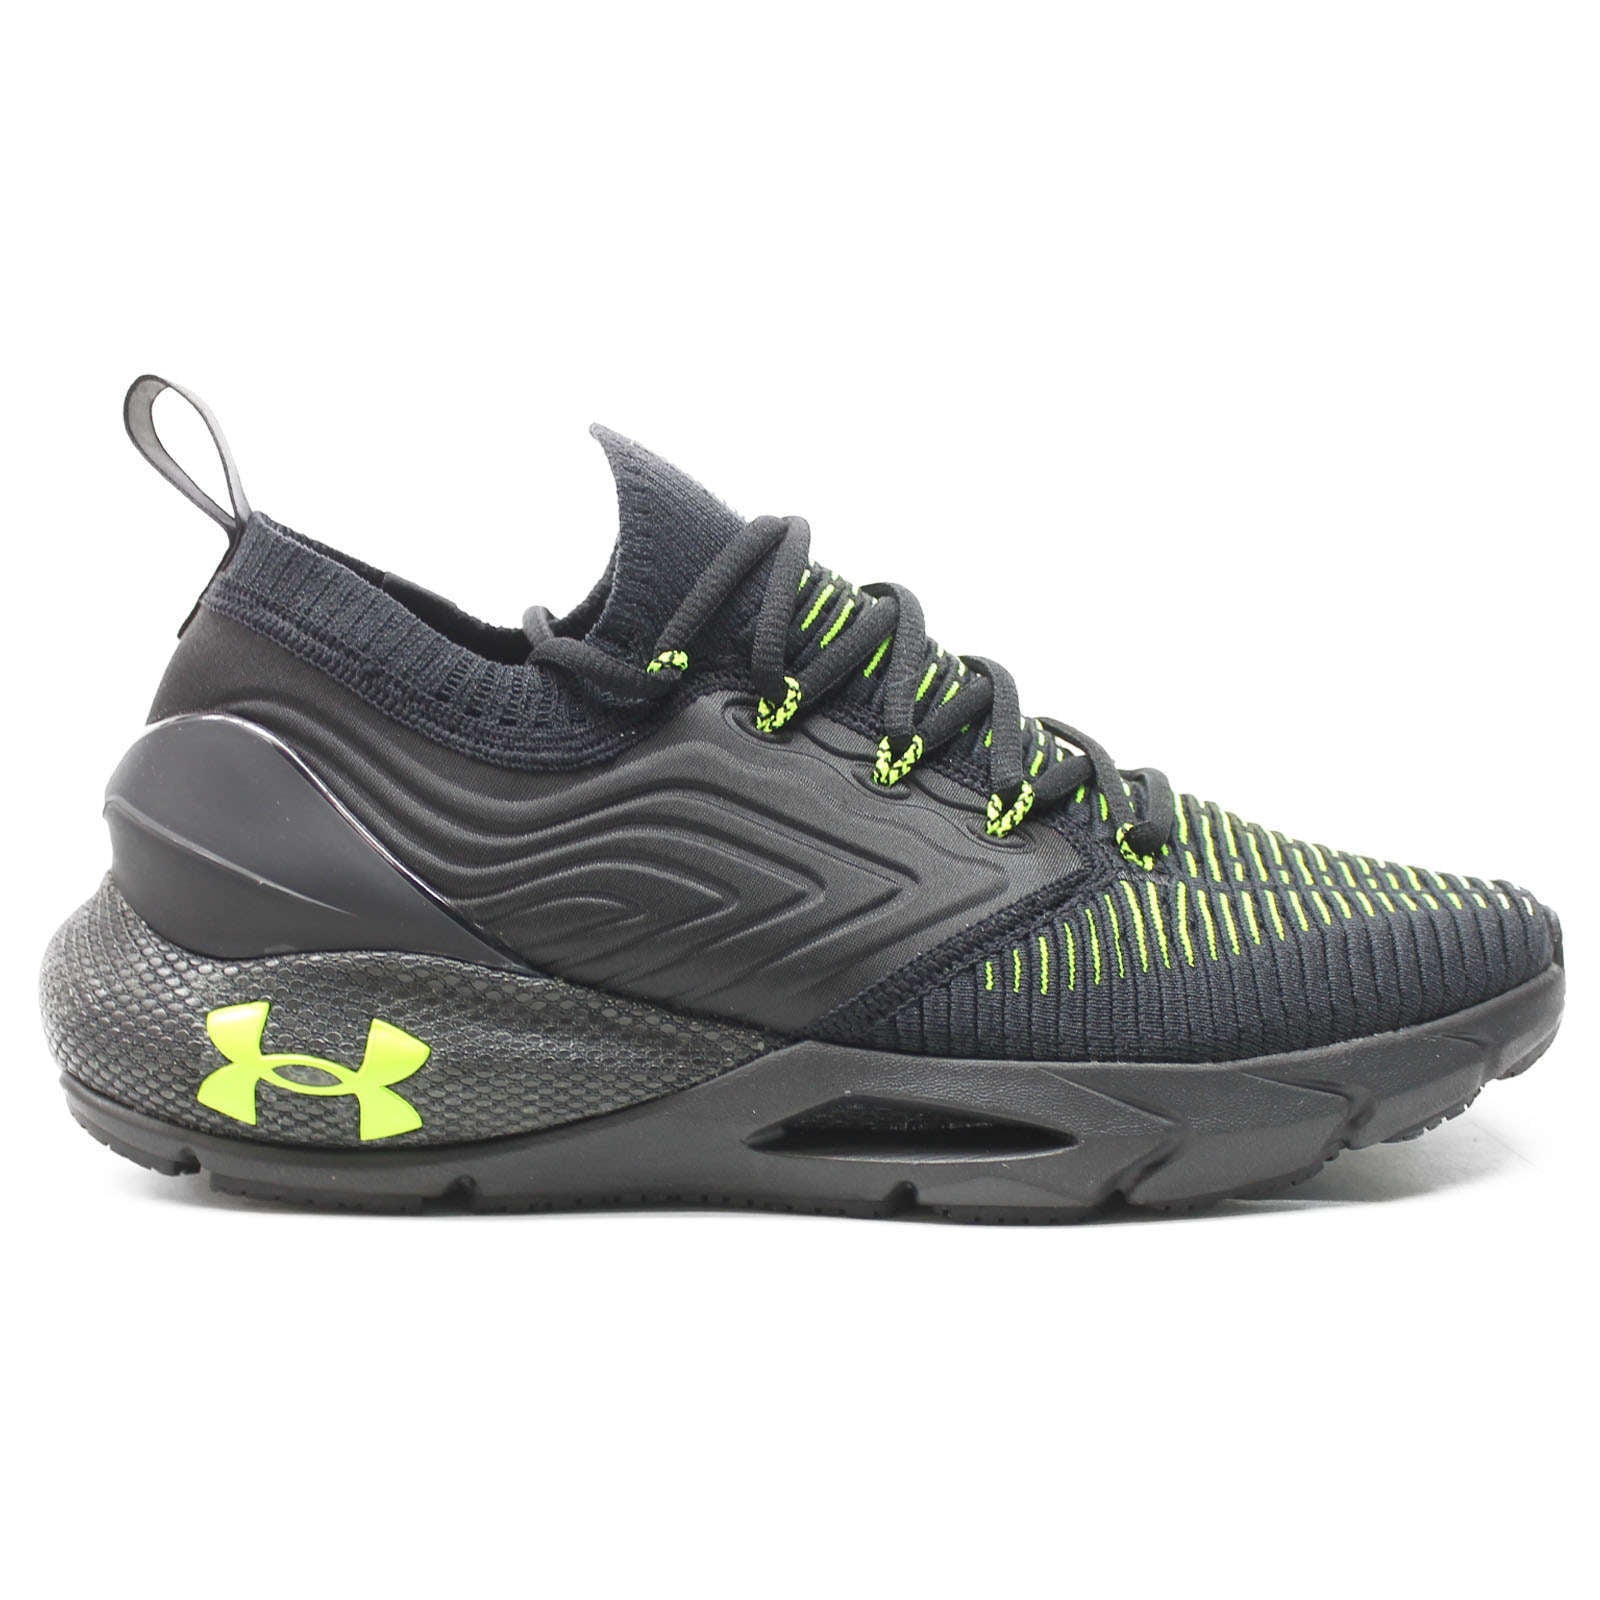 Under Armour HOVR Phantom 2 INKNT Synthetic Textile Men's Low-Top Trainers#color_black yellow